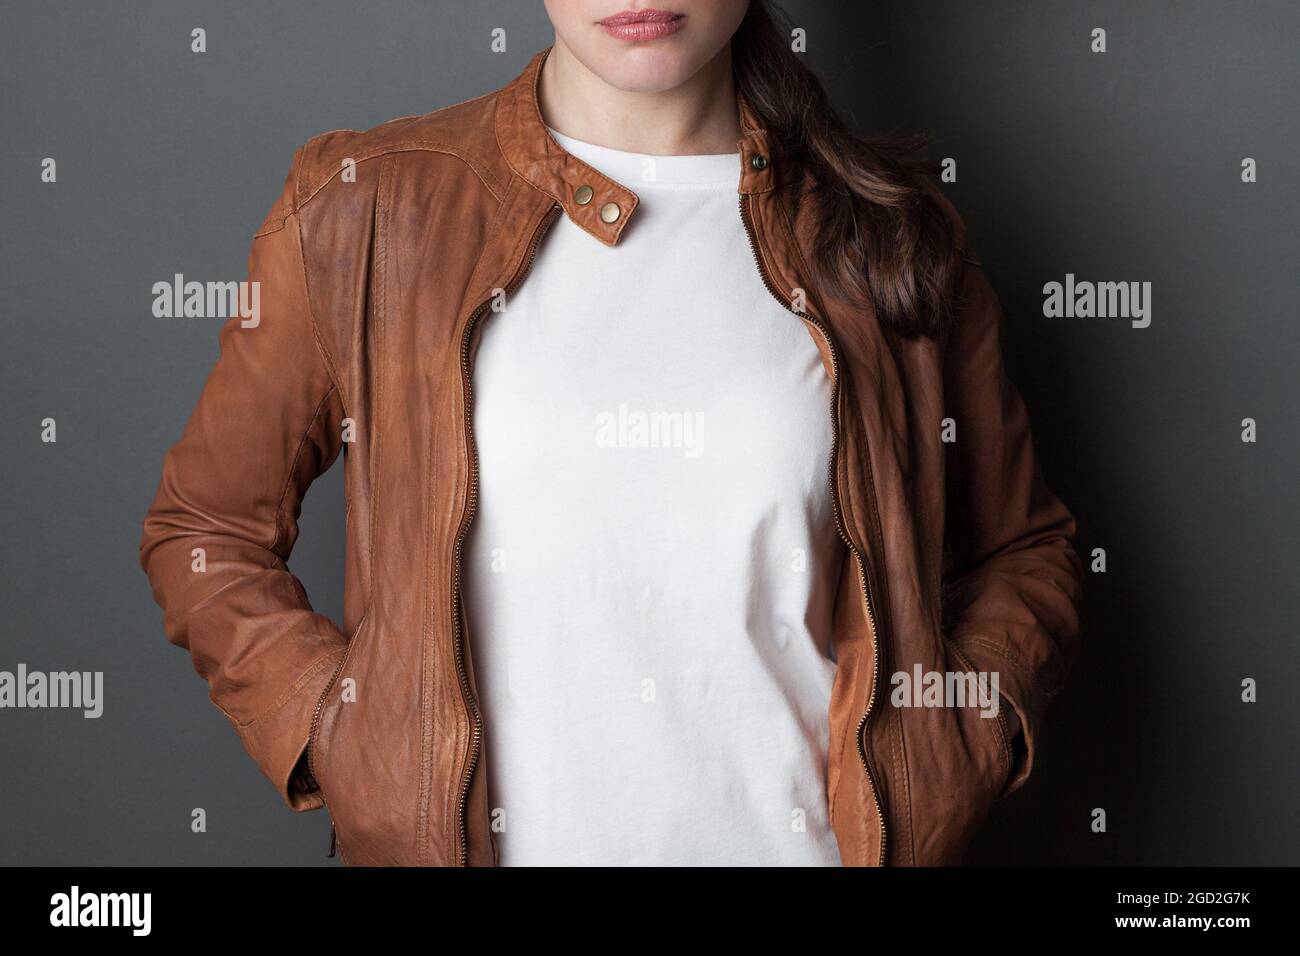 Young woman in a white t-shirt and brown leather jacket Stock Photo - Alamy